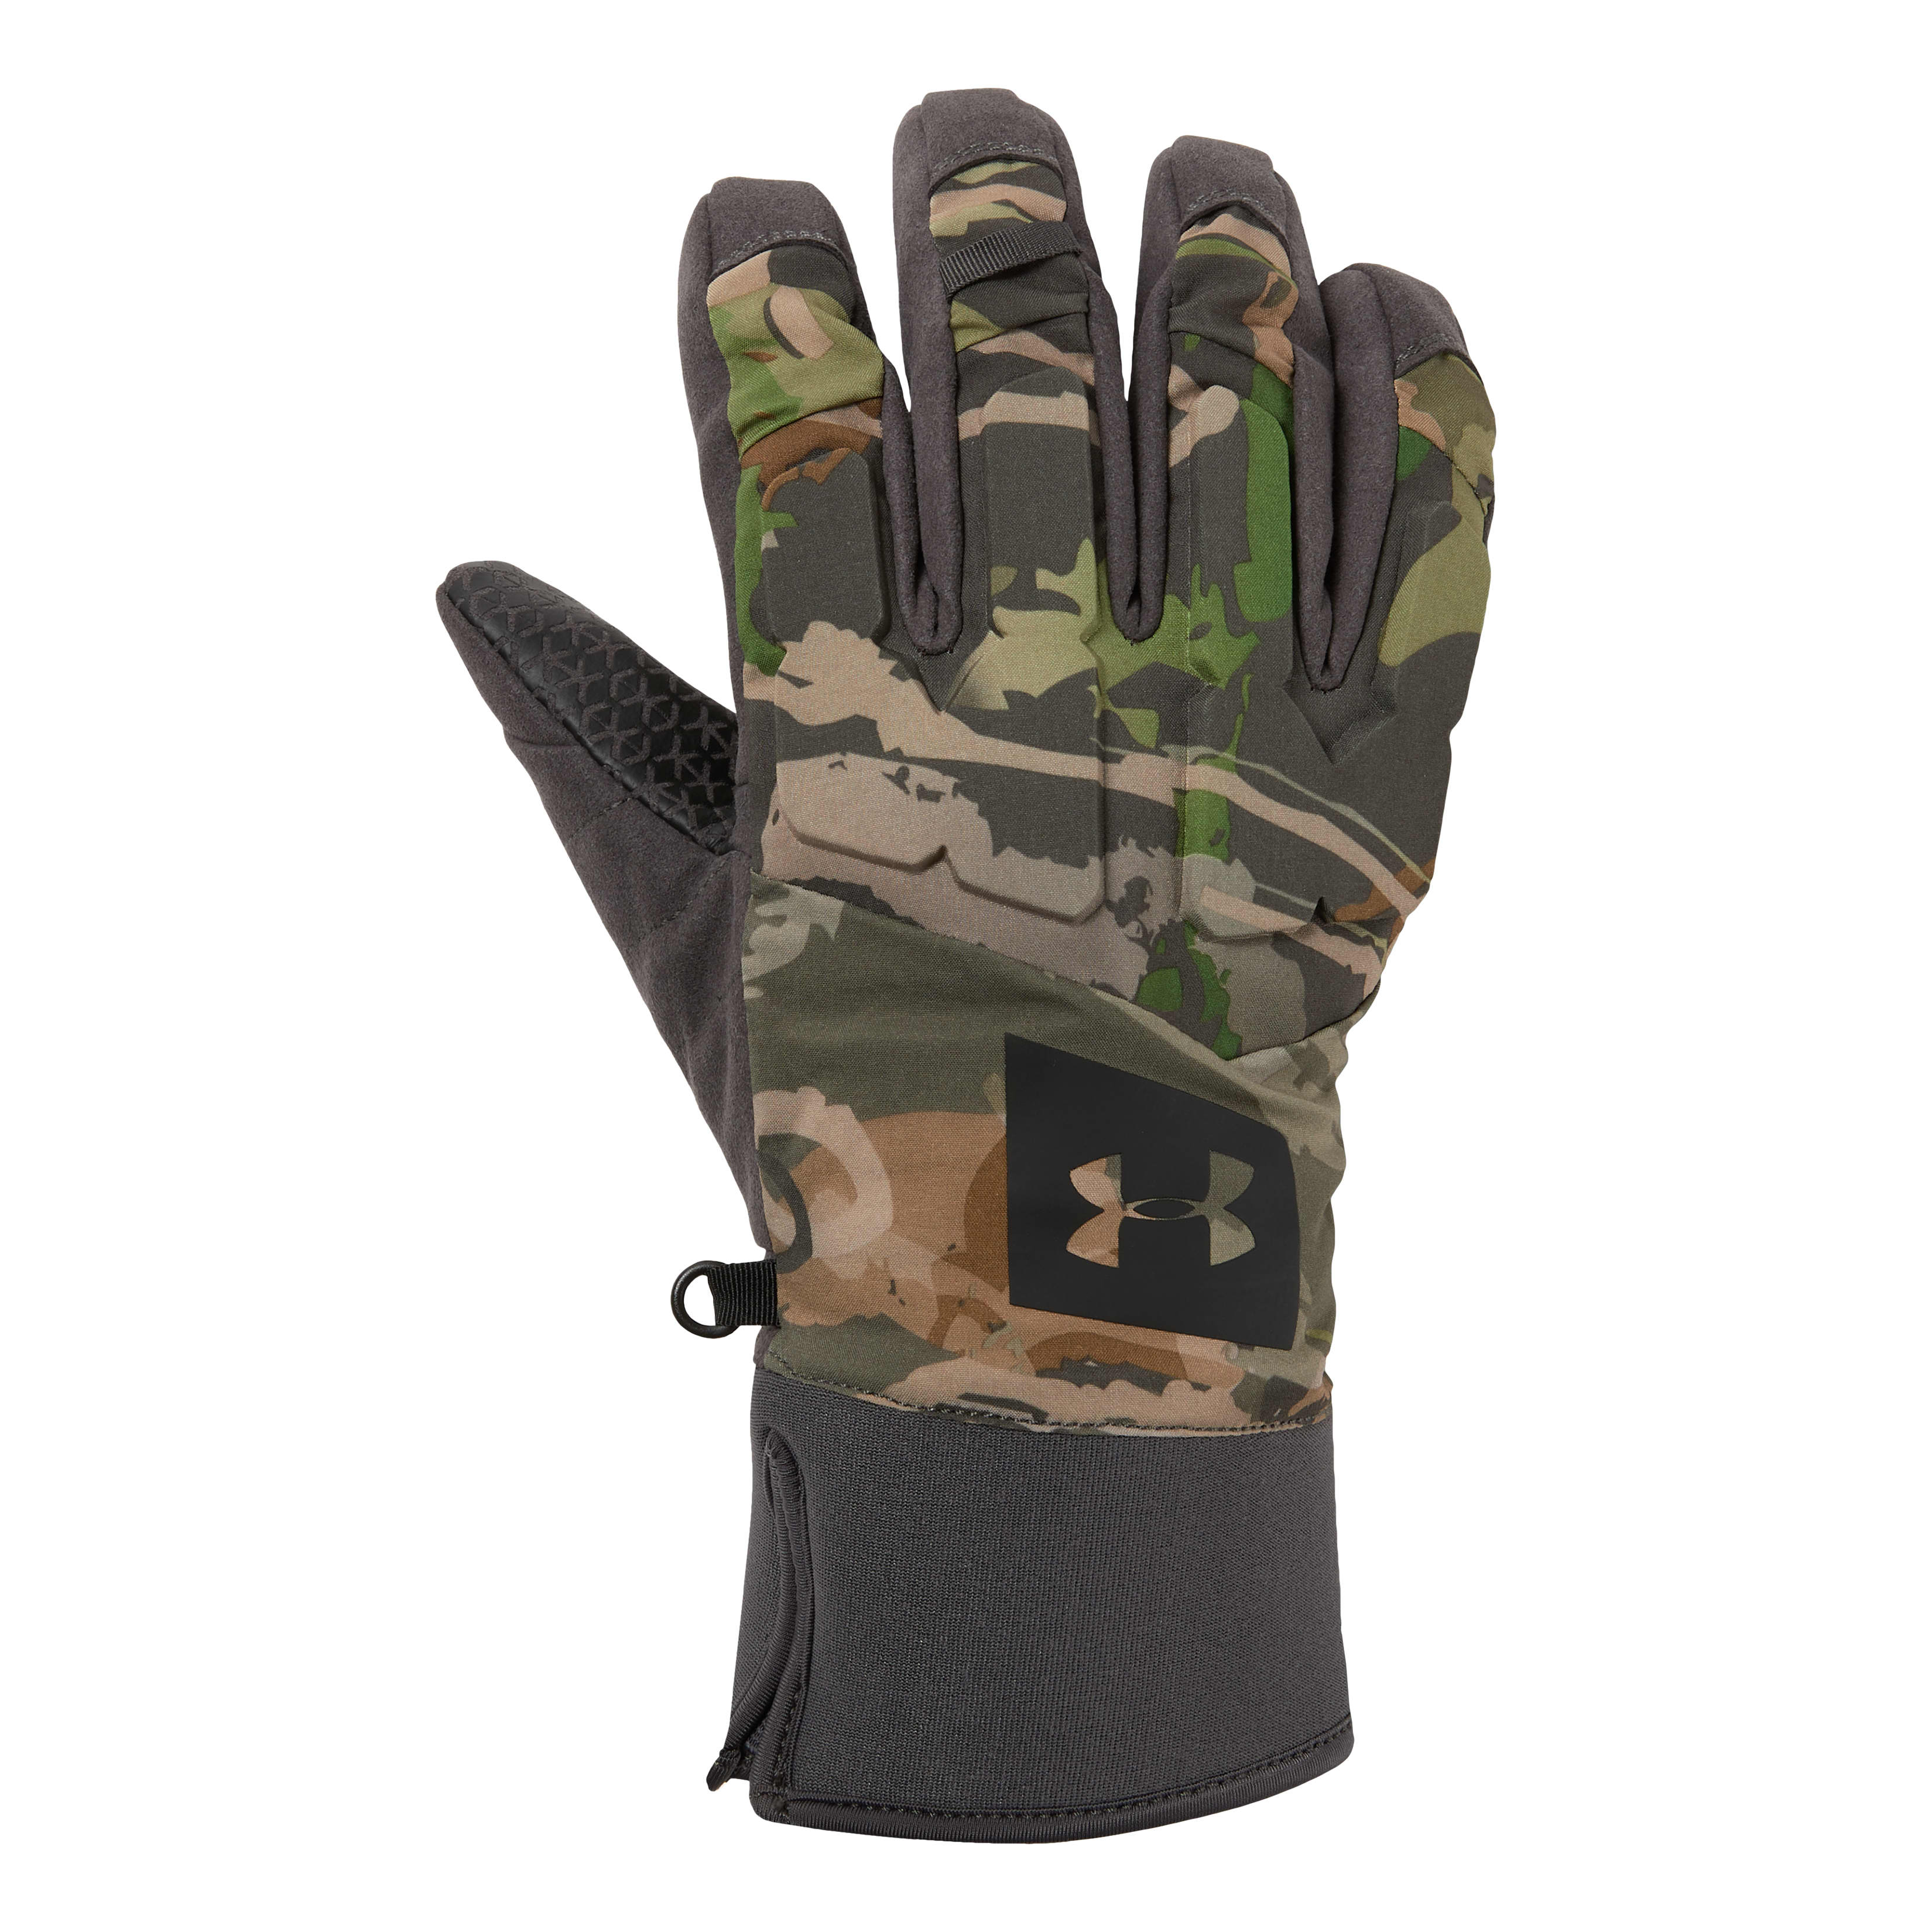 Under Armour® Men’s Mid Season Hunting Gloves - Ridge Reaper Forest/Charcoal